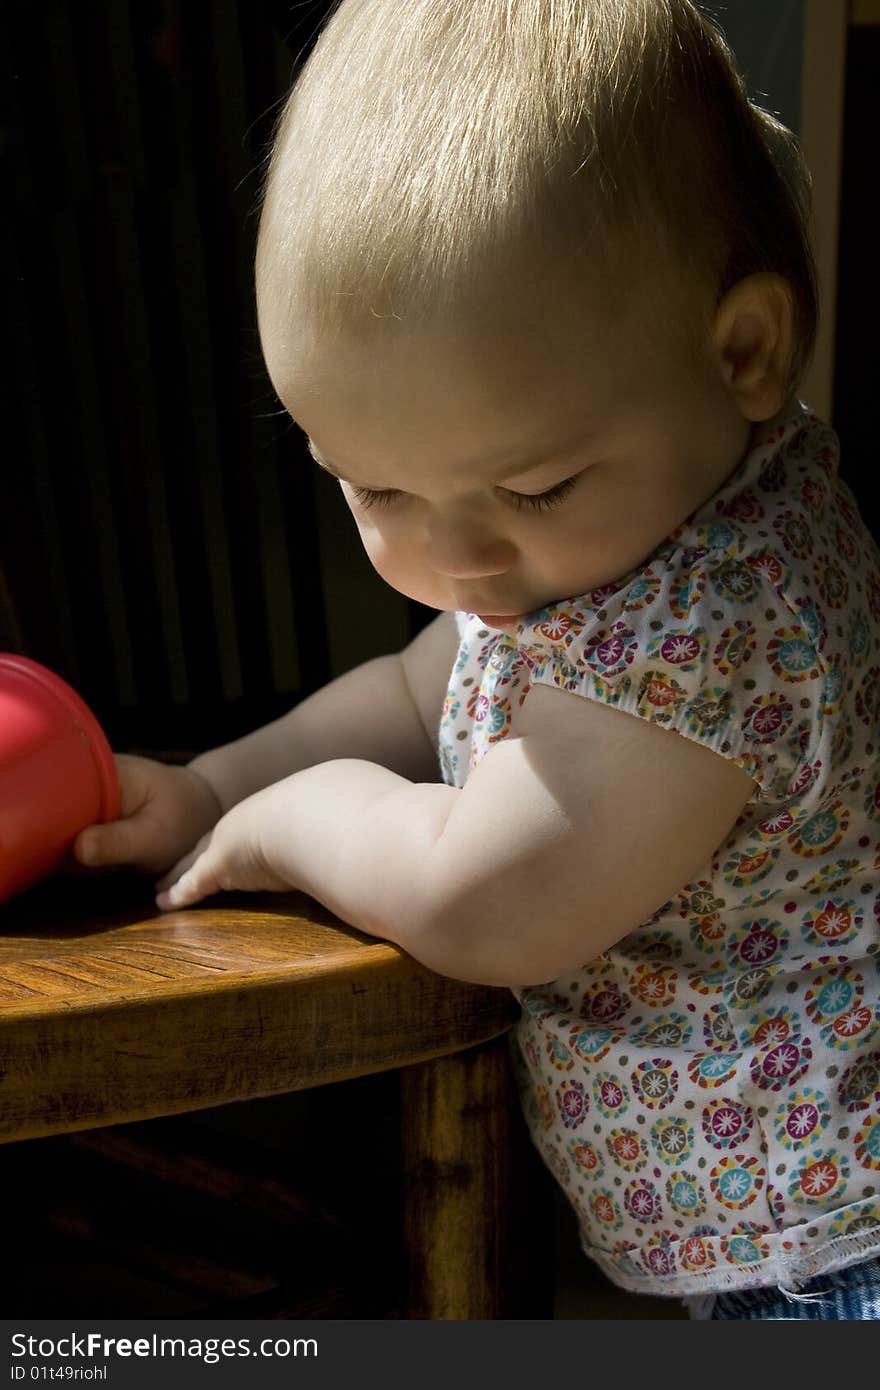 Candid photo of an infant girl staring downwards whilst leaning on a chair. Natural light from a window. Candid photo of an infant girl staring downwards whilst leaning on a chair. Natural light from a window